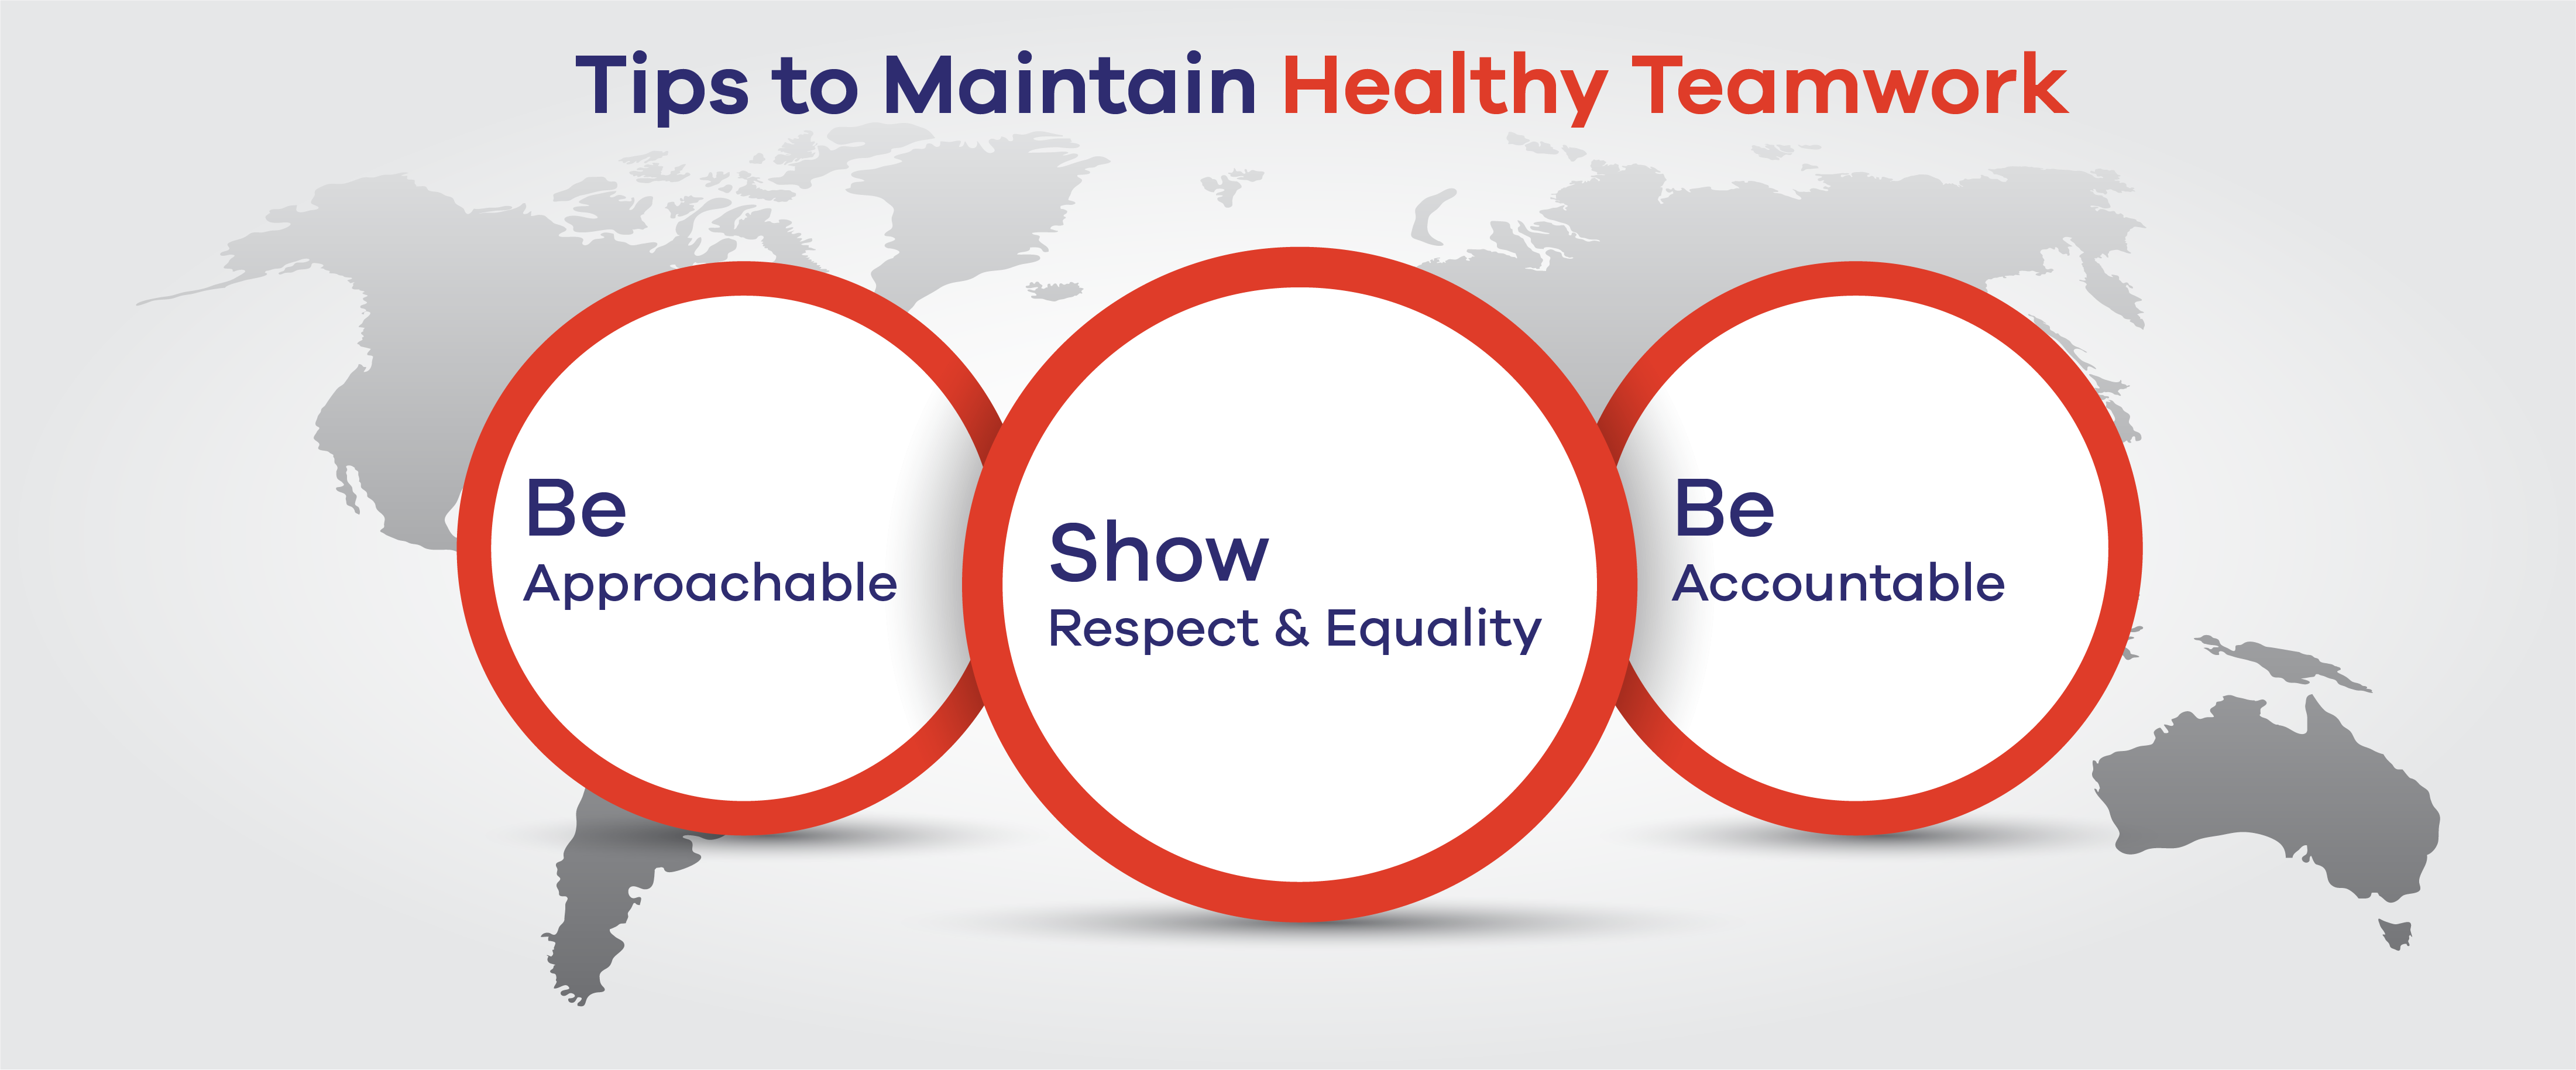 Tips to Maintain Healthy Teamwork 